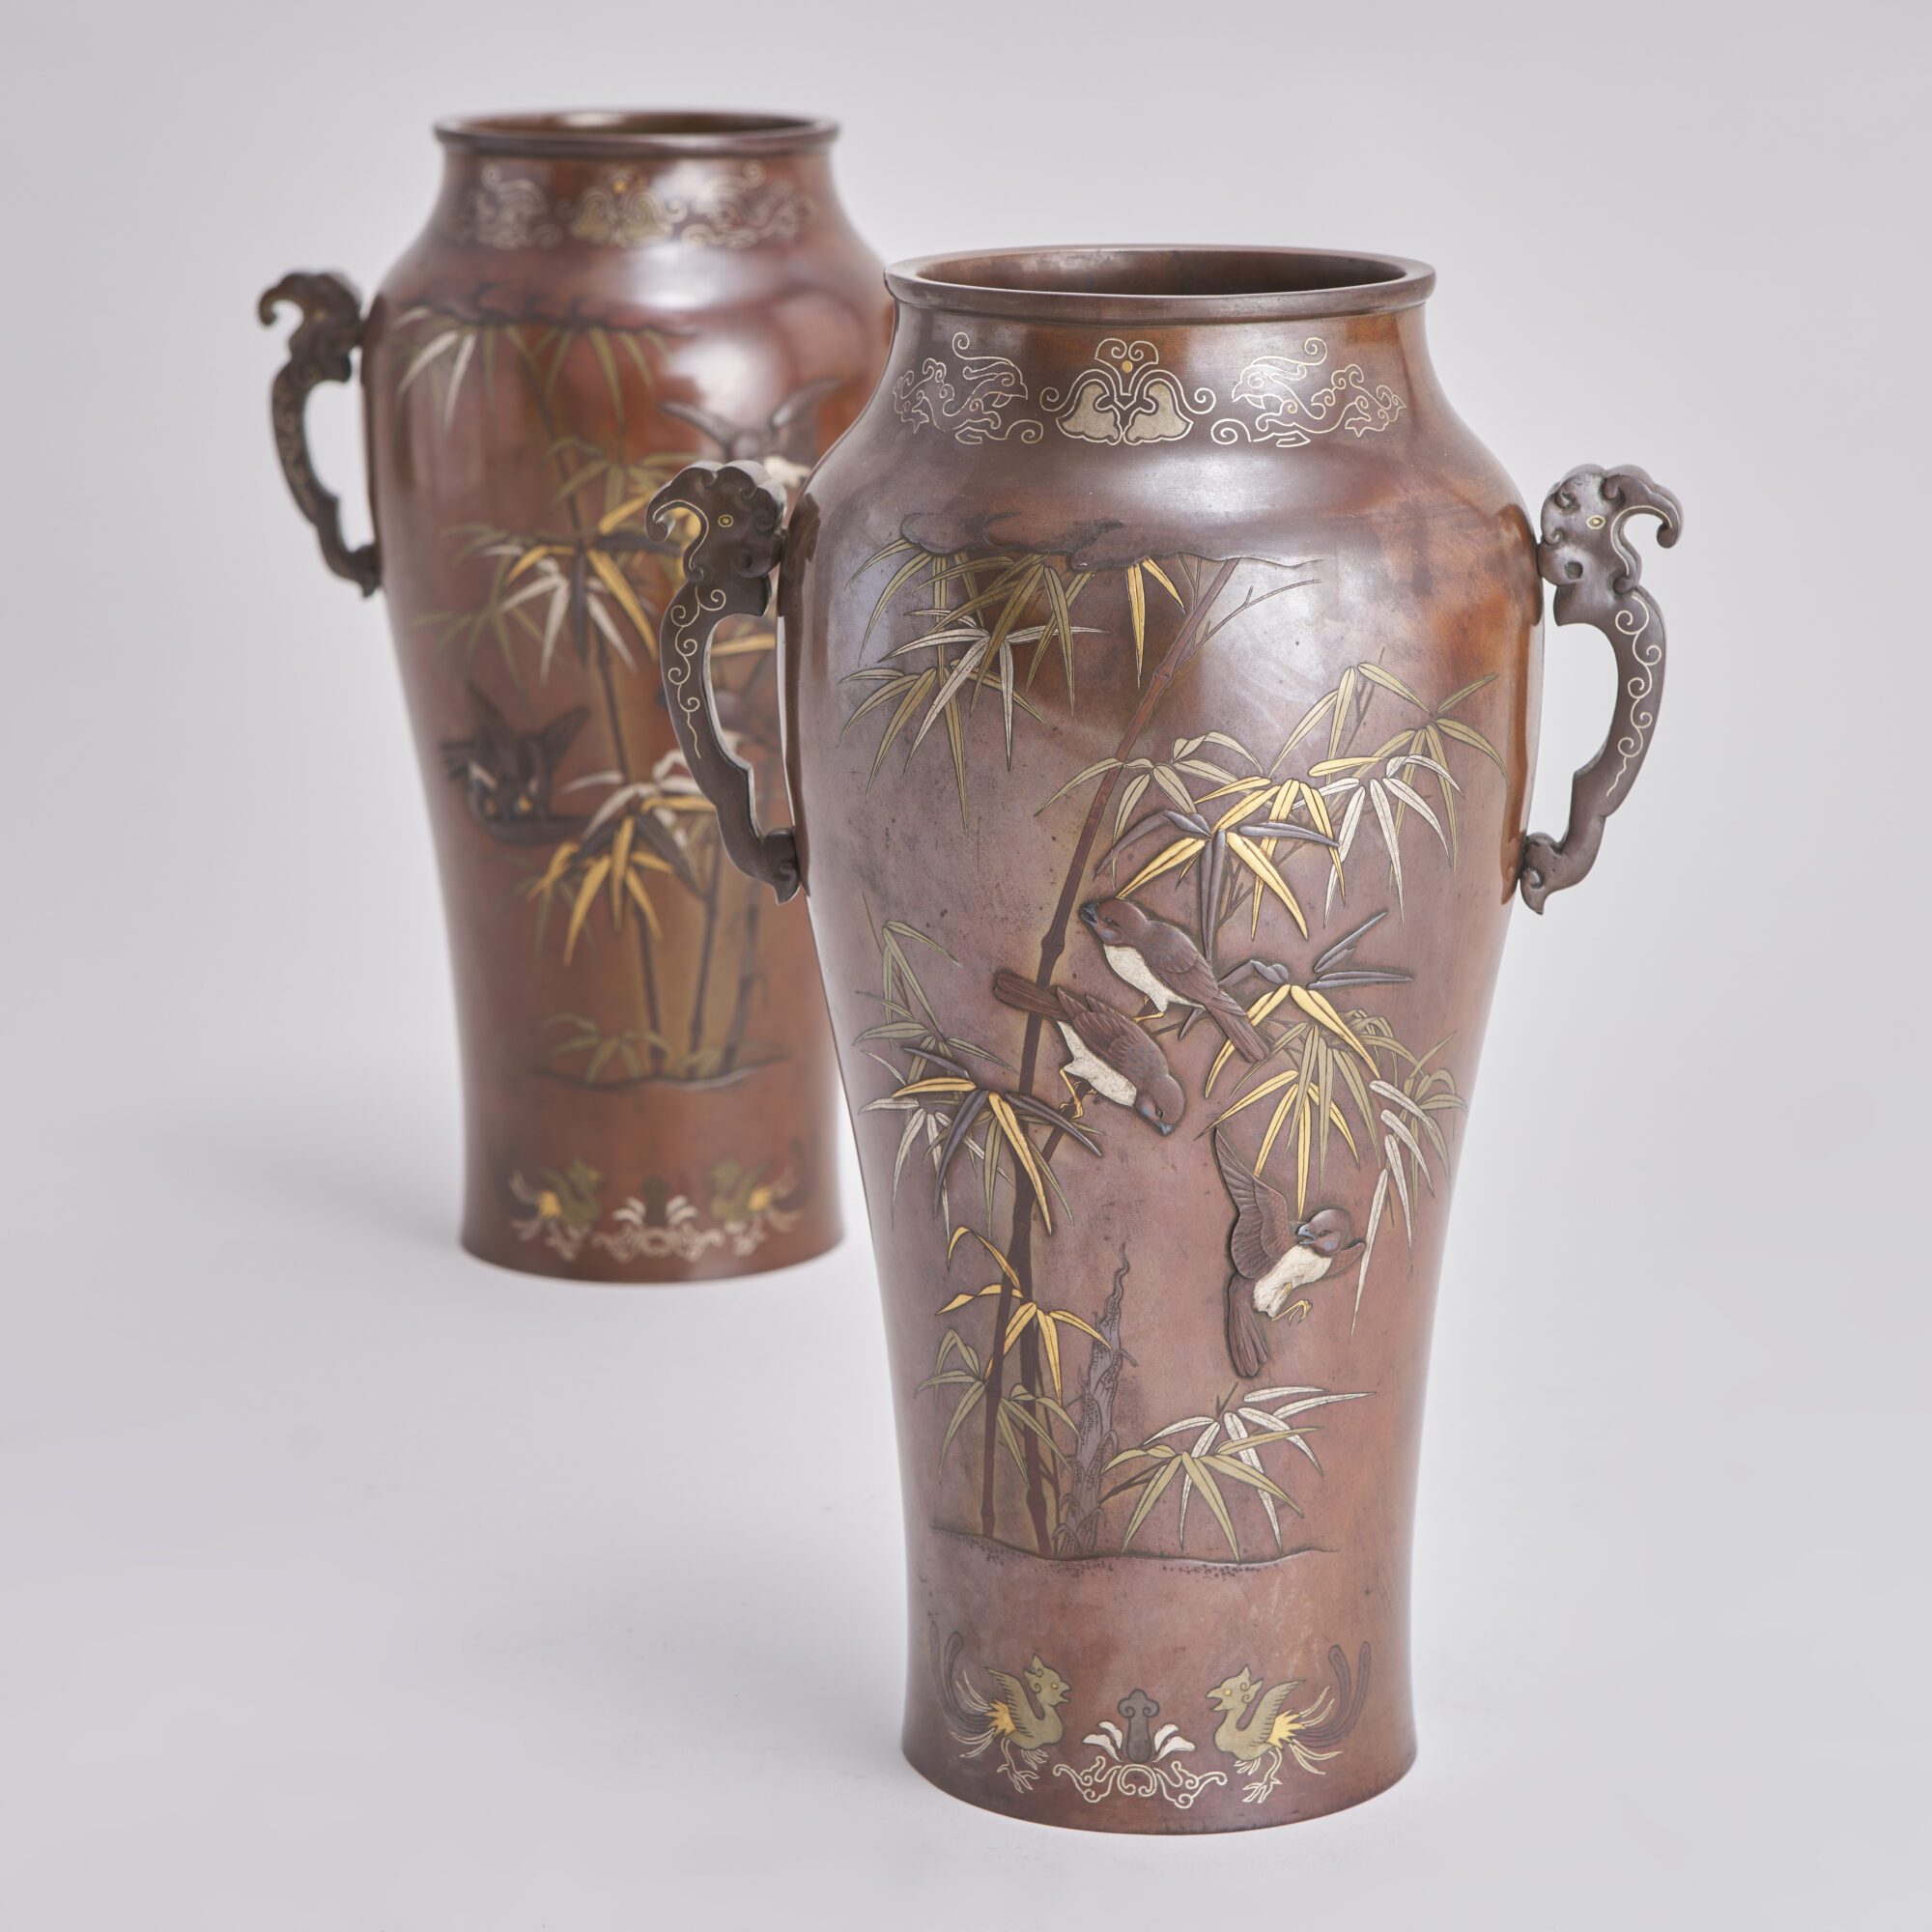 An attractive pair of late 19th Century inlaid and onlaid Bronze Japanese vases from Kevin Page